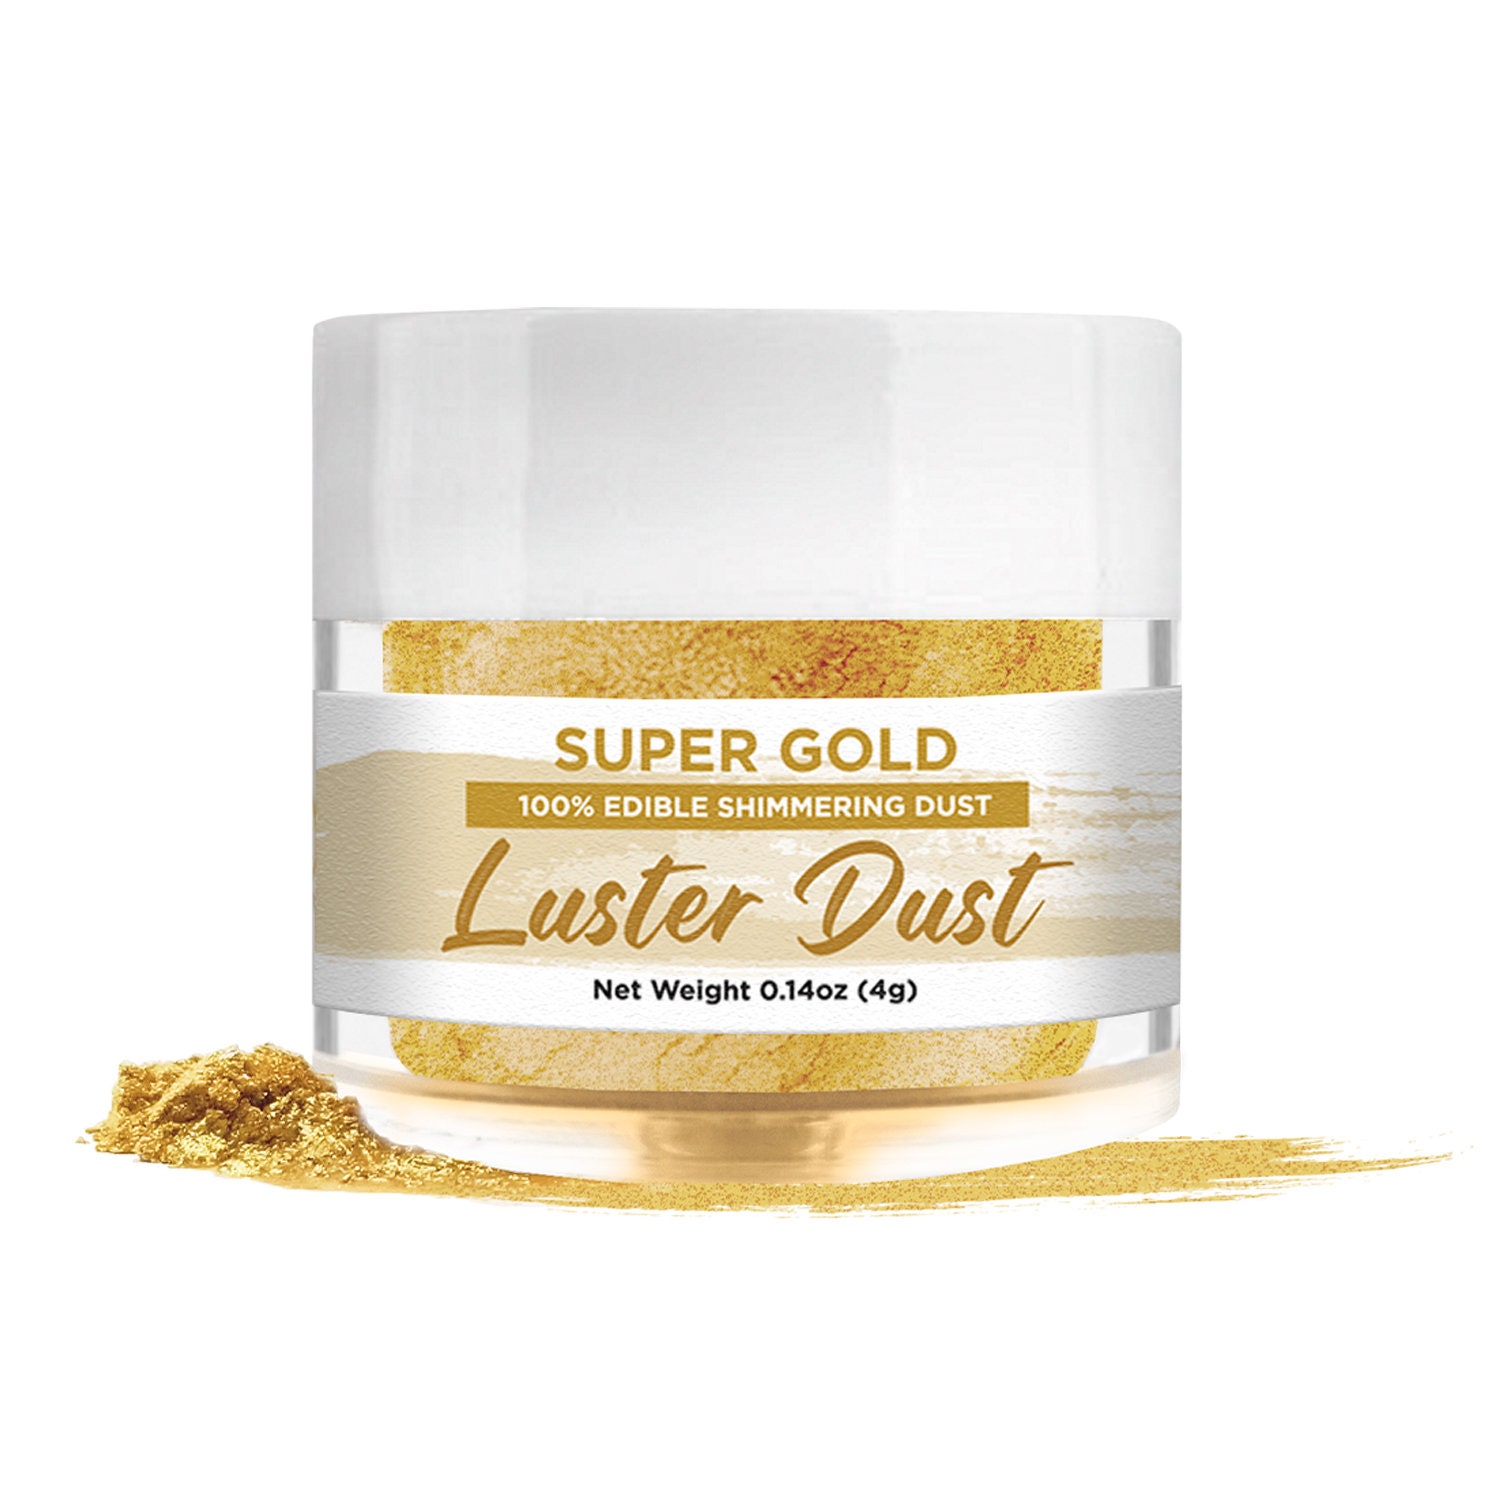 Super Gold Edible Luster Dust and Cake Paint Edible Powder KOSHER Certified  Paint, Powder, Dust Cakes, Cupcakes, Vegan Paint & Dust -  Sweden